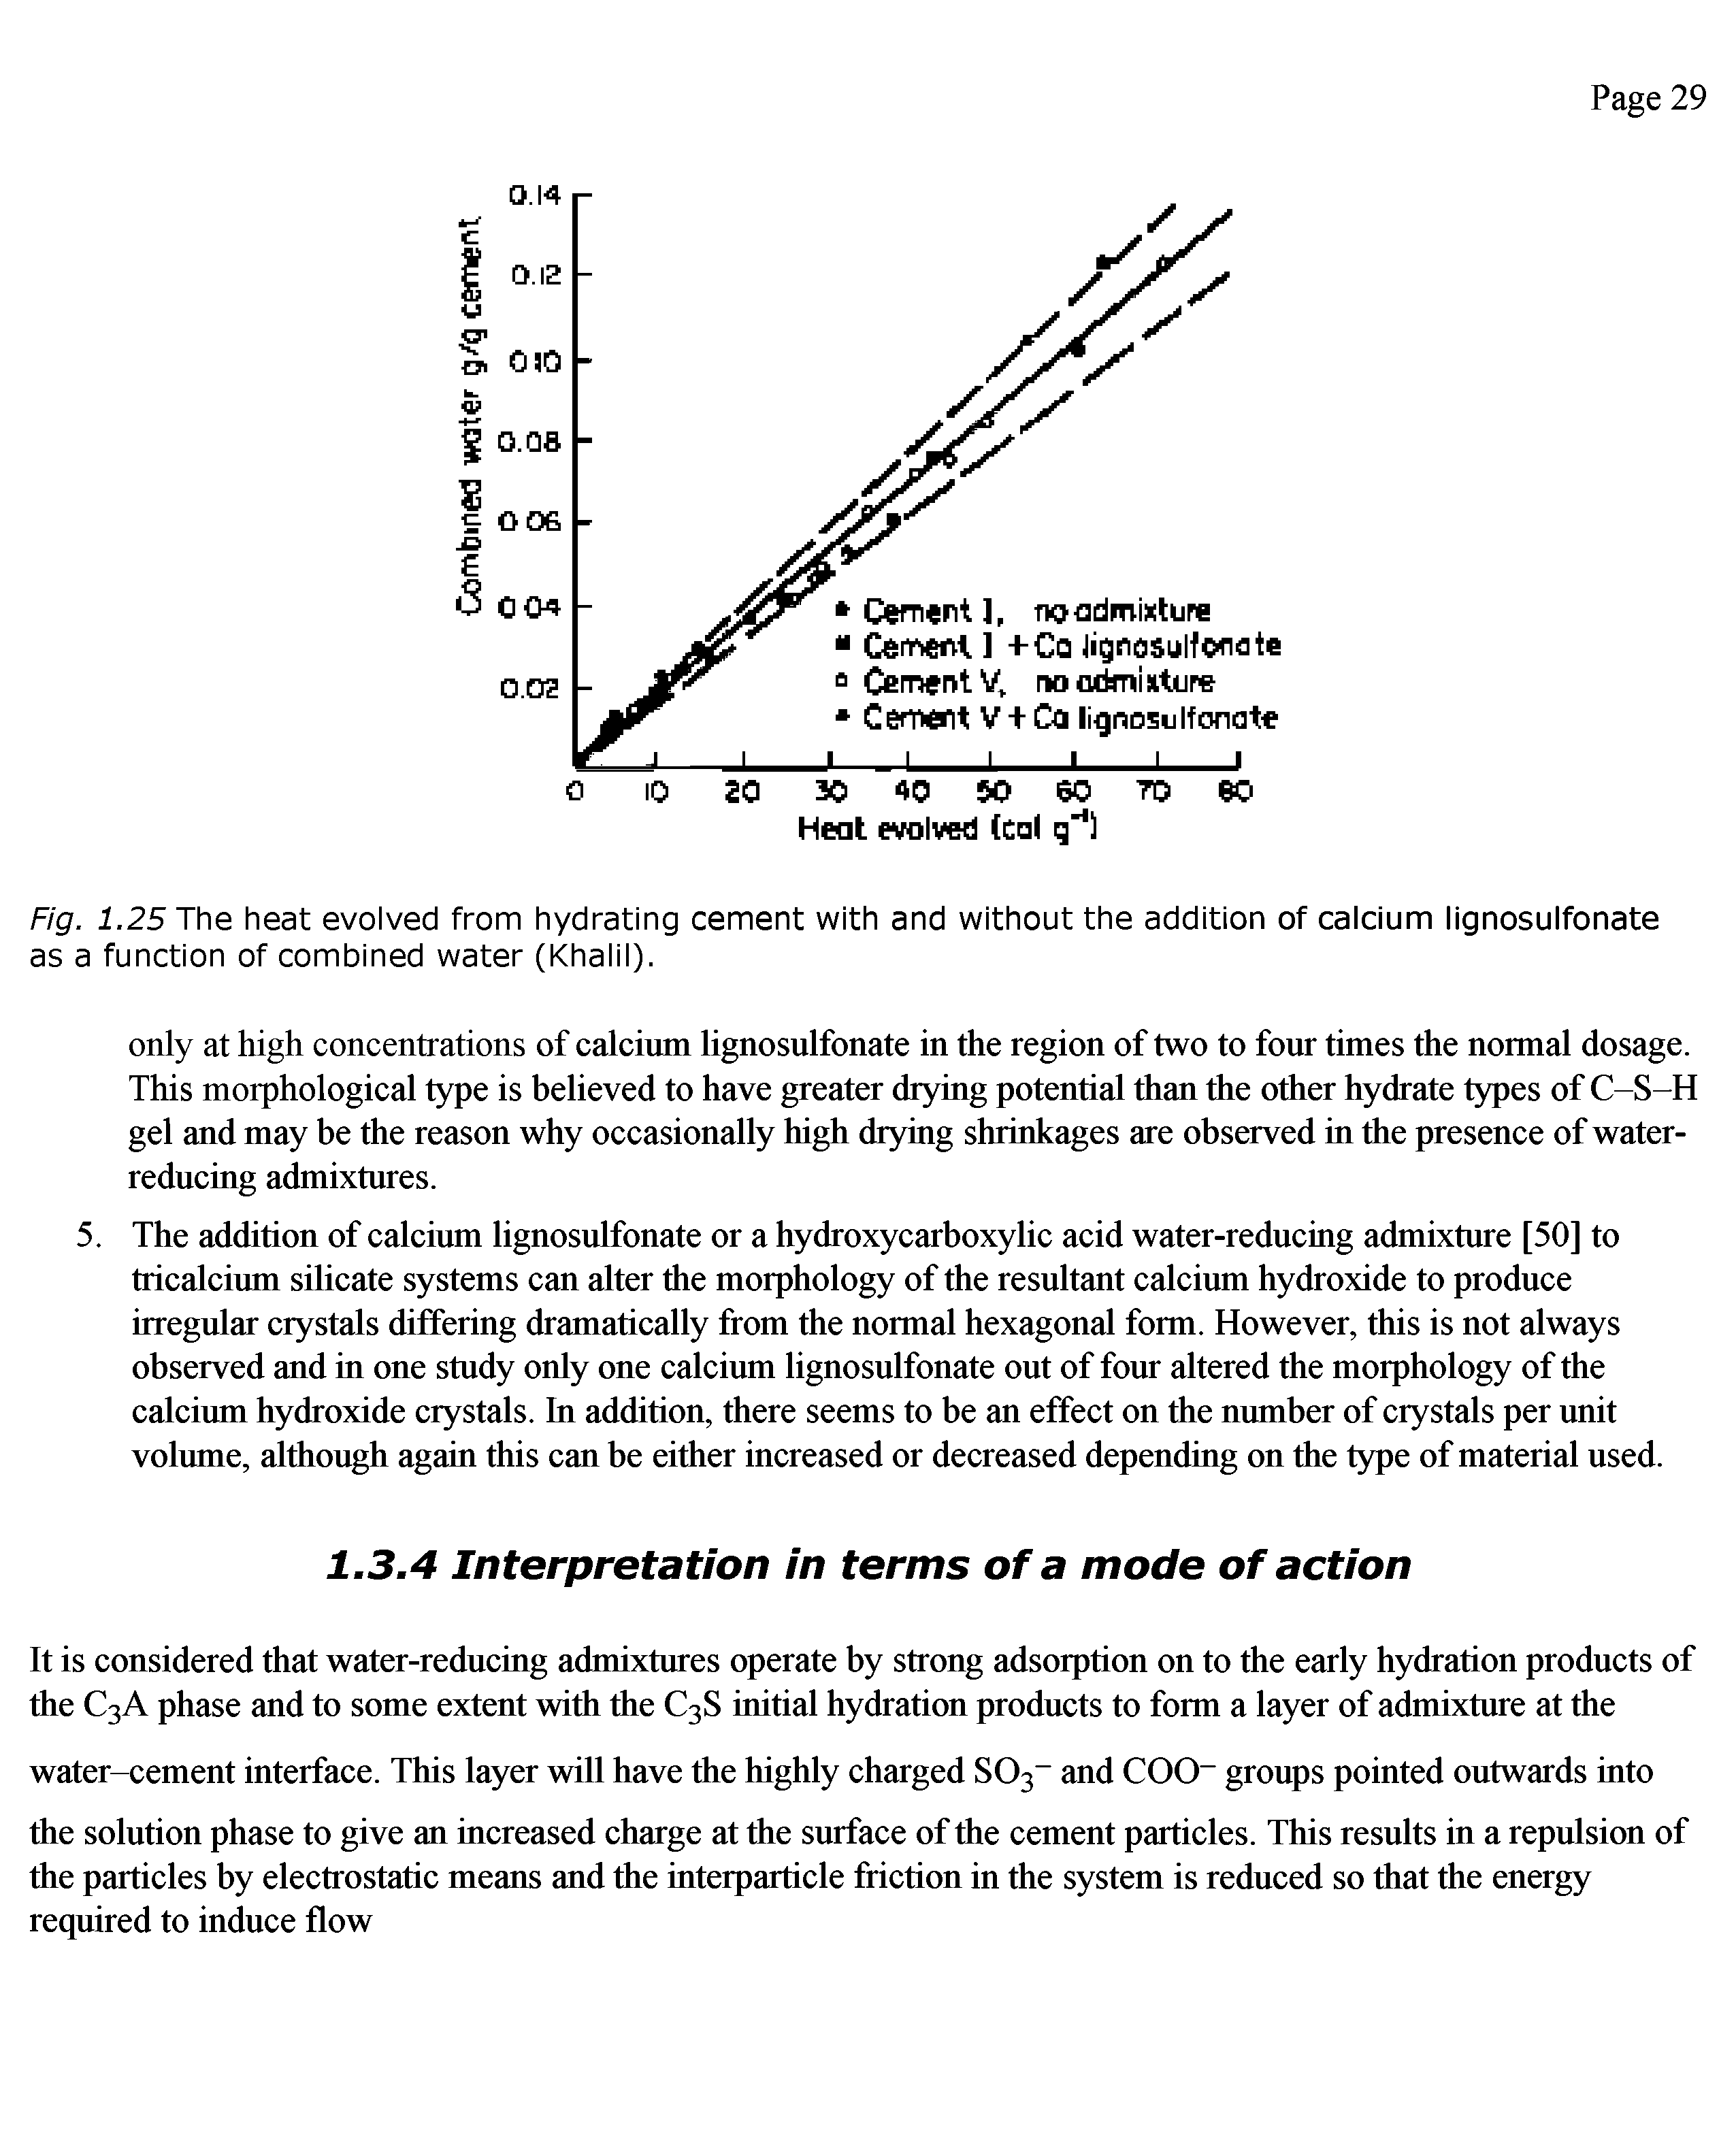 Fig. 1.25 The heat evolved from hydrating cement with and without the addition of calcium lignosulfonate as a function of combined water (Khalil).